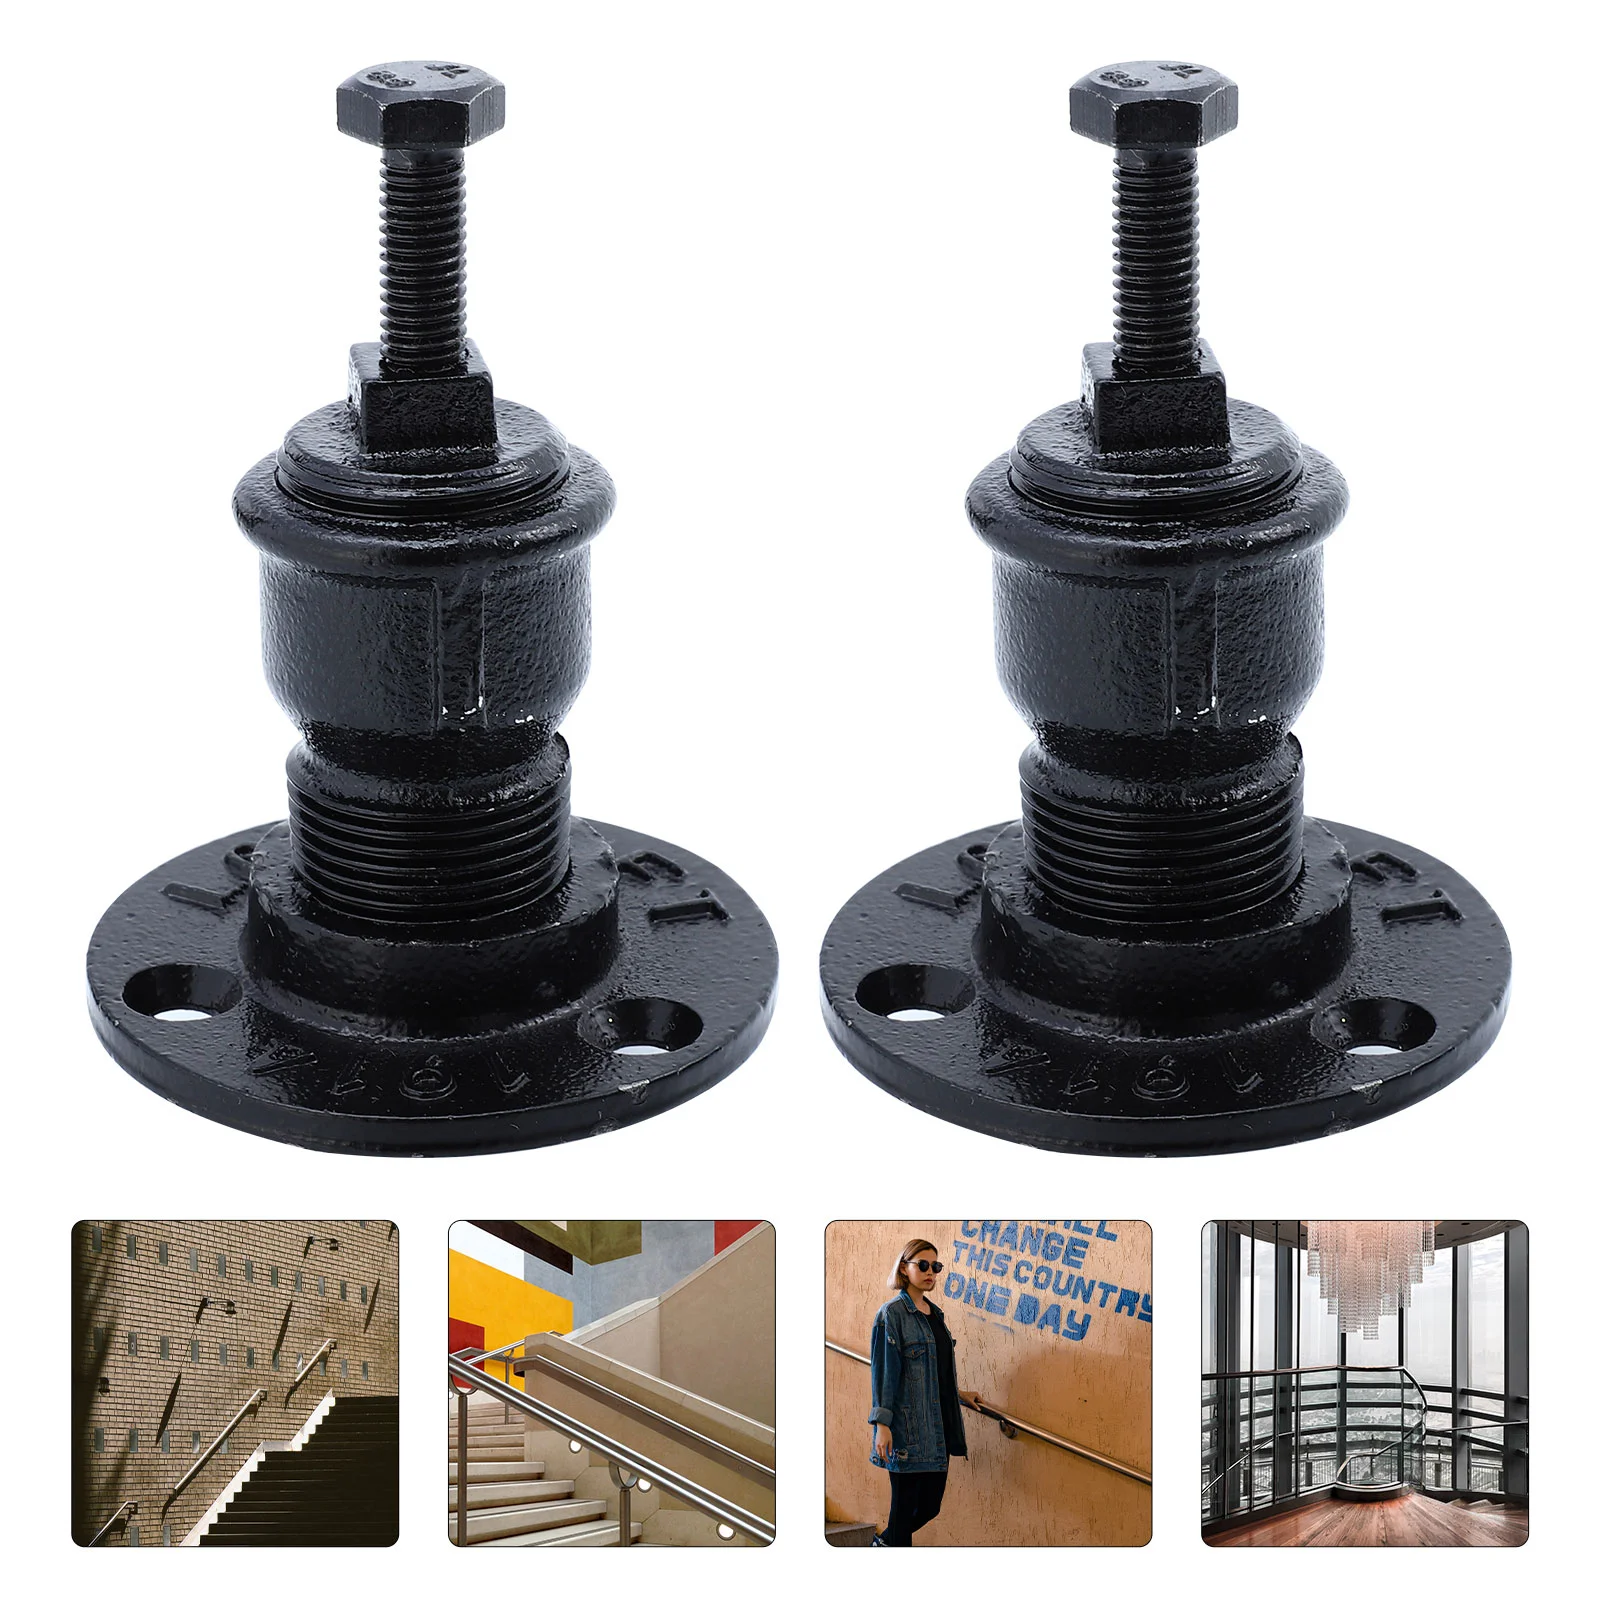 

2 Pcs Stair Bracket Wall Mount Railing Water Pipe Metal Handrail Mounted Iron Banister Support Handrails For stairs